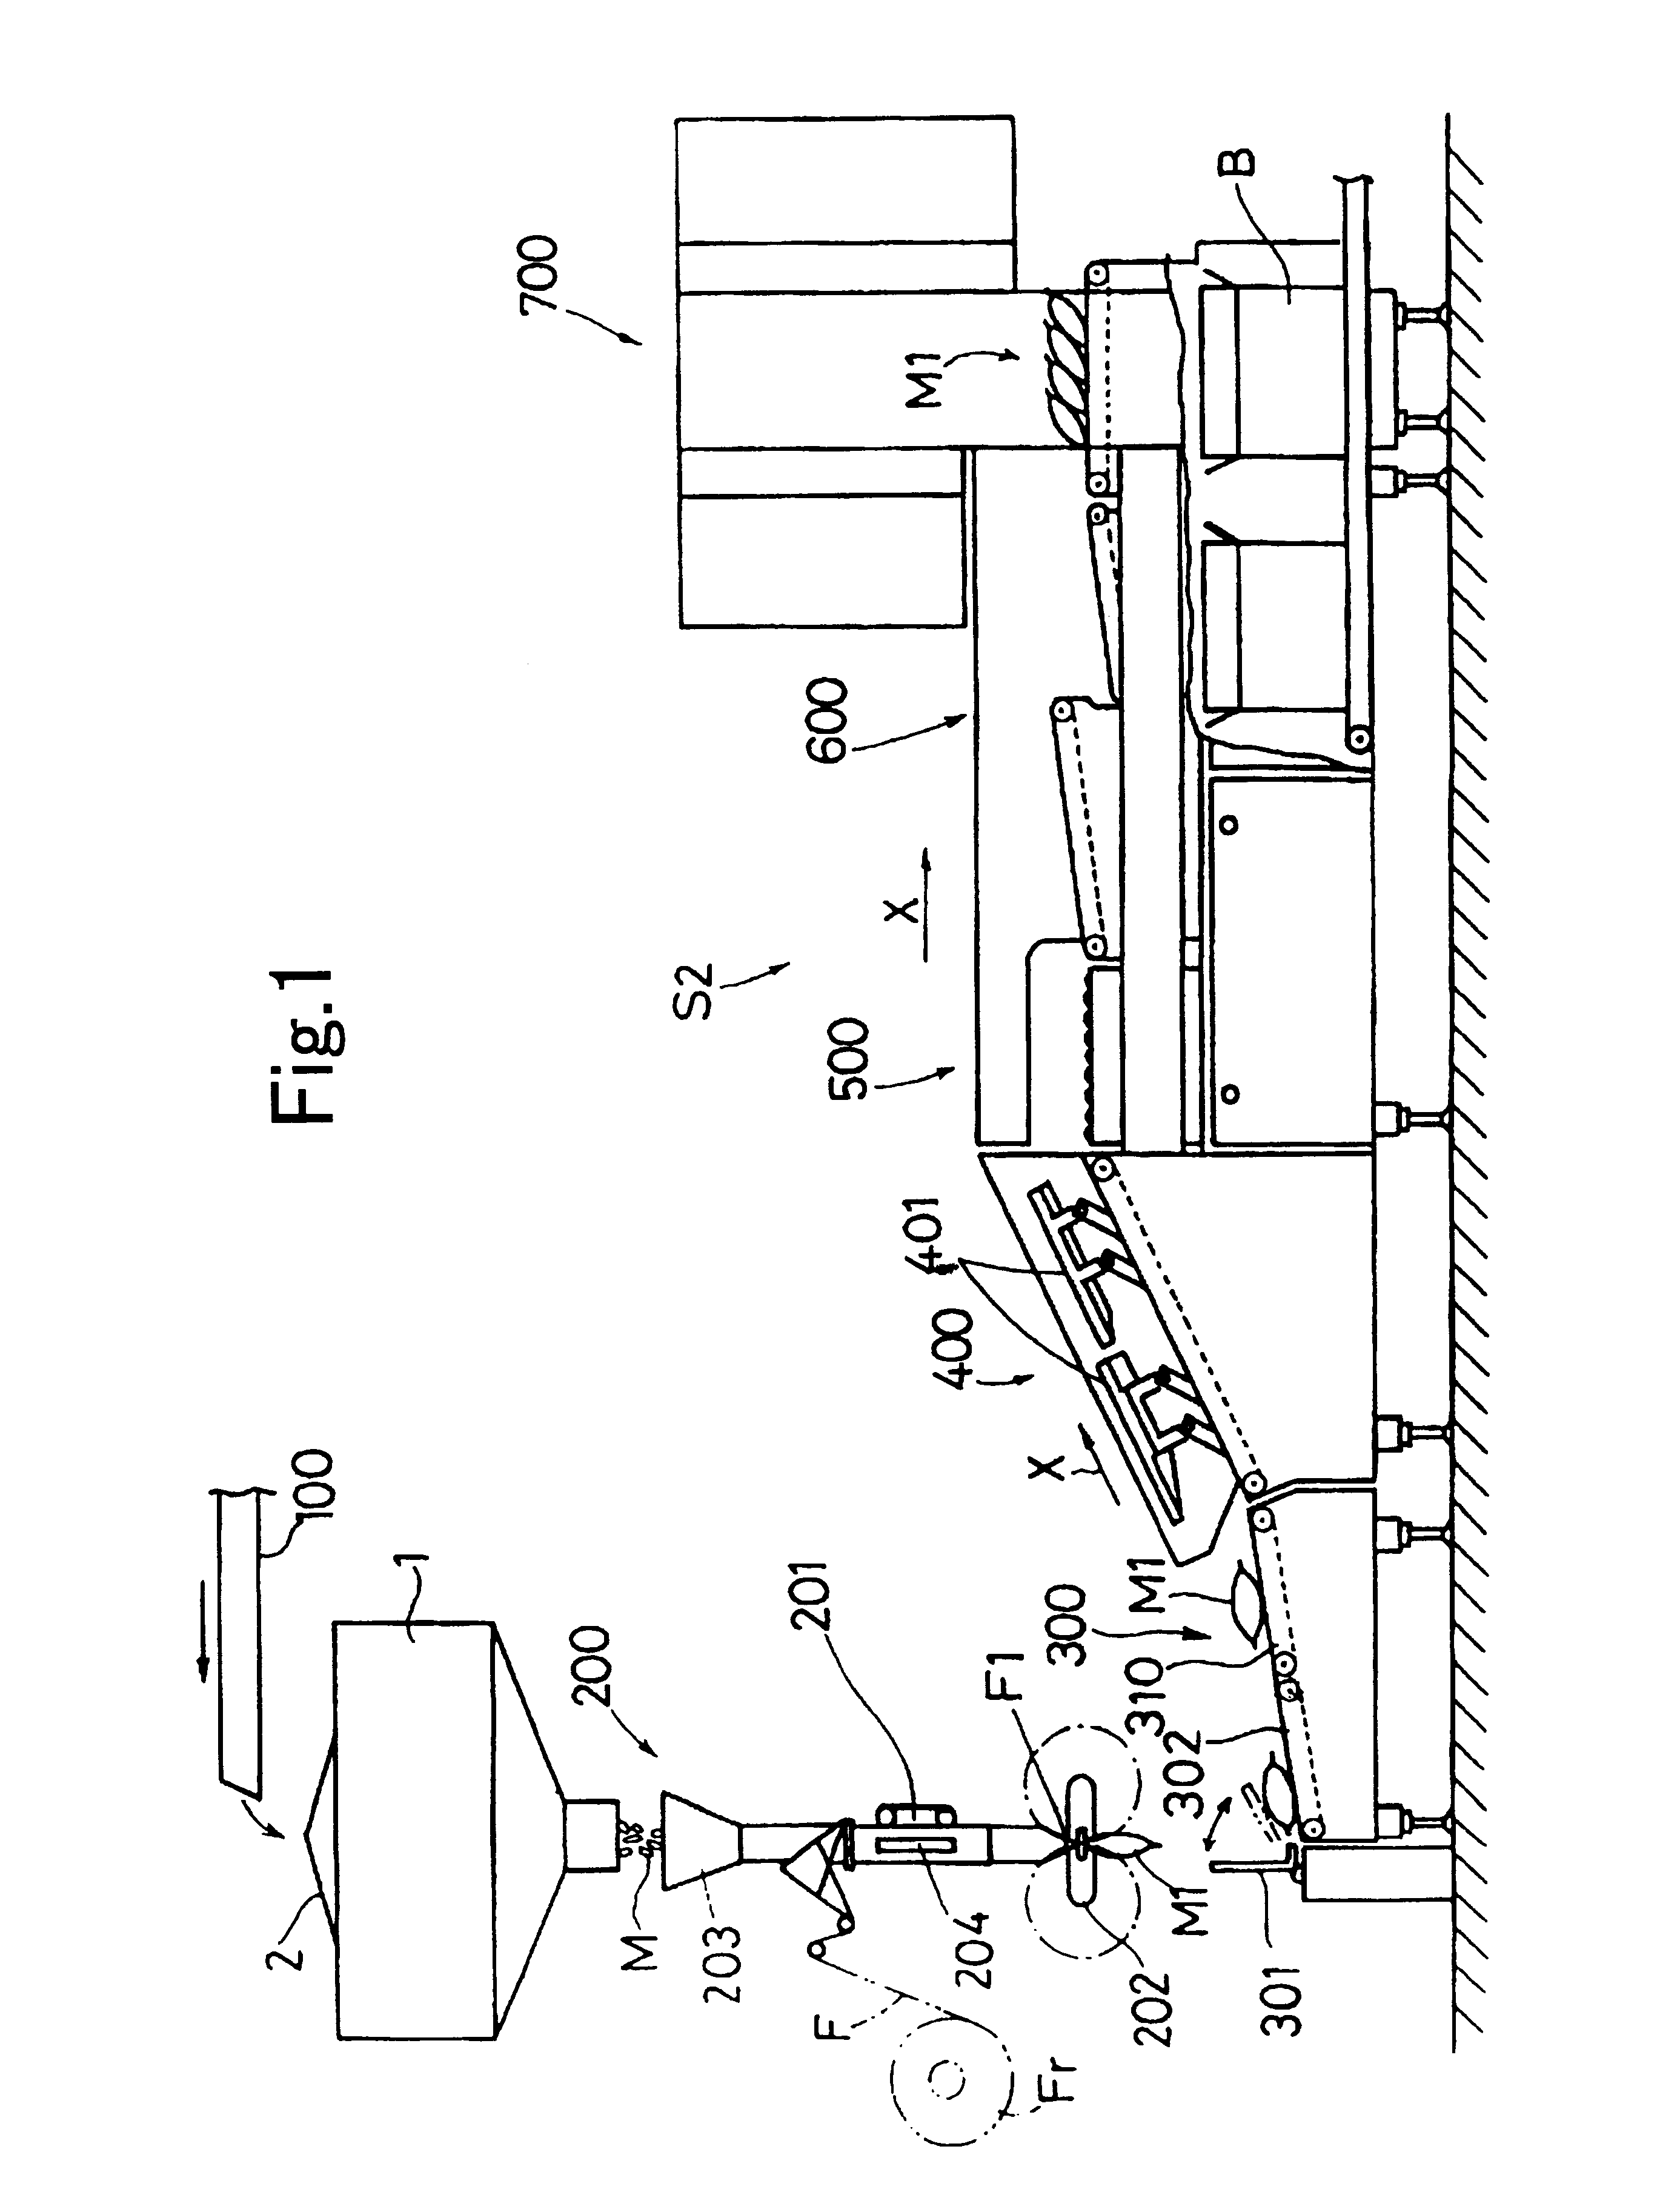 Automatic package inspecting system